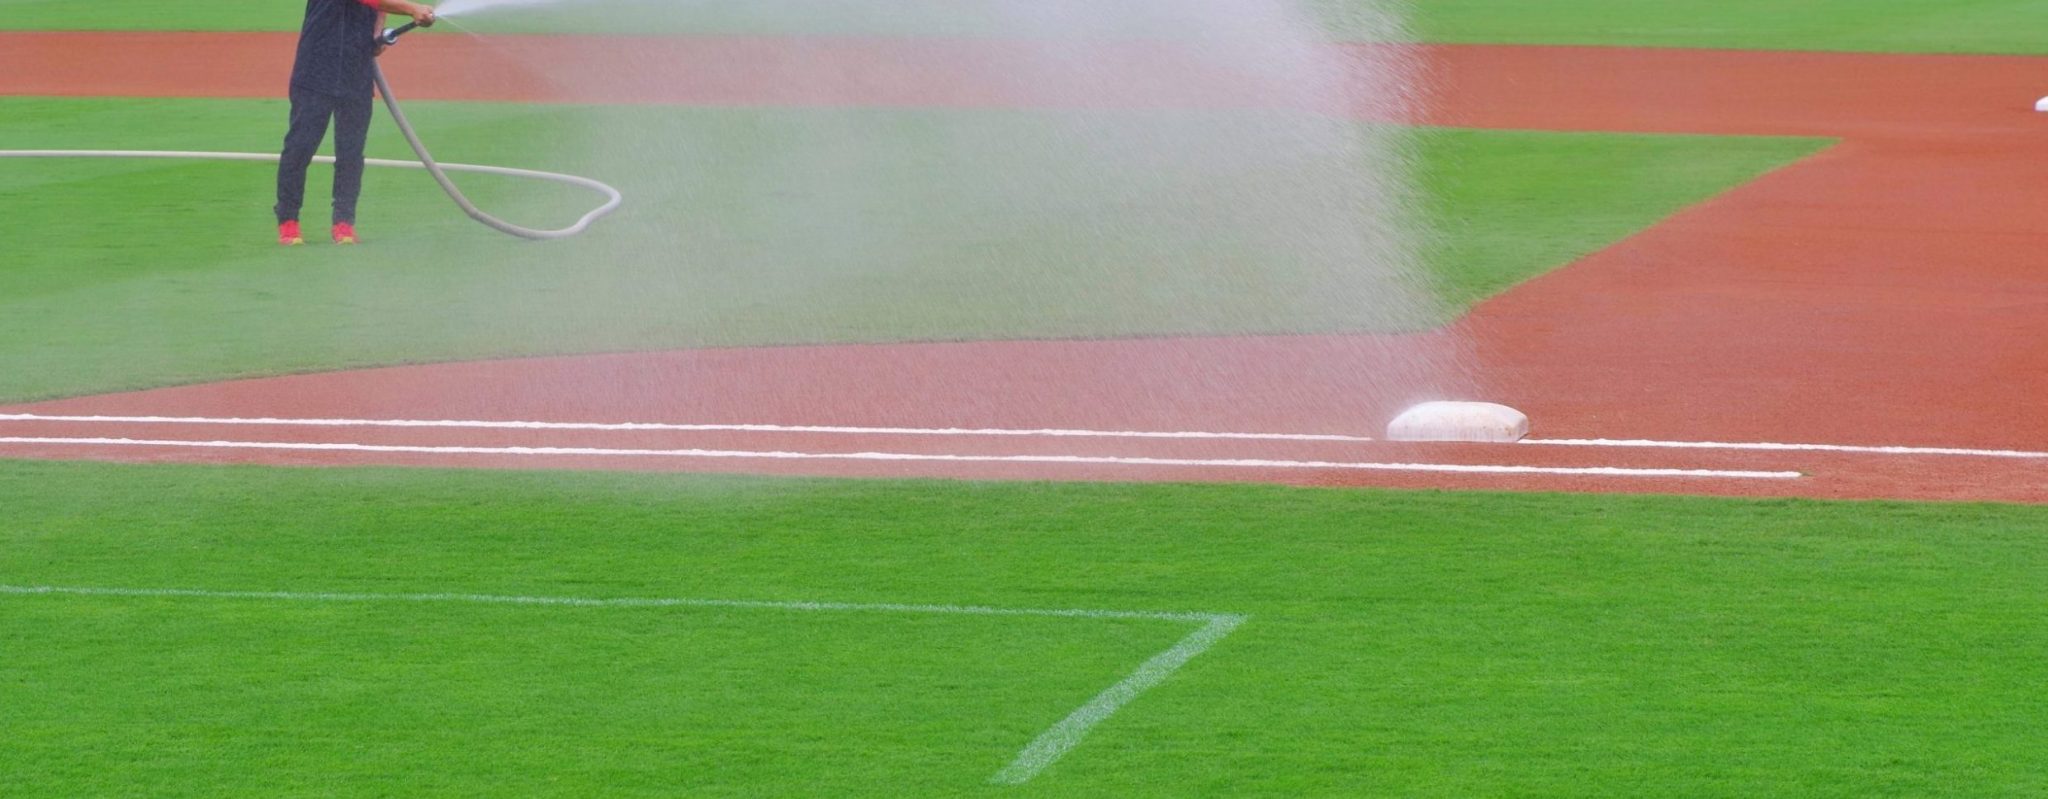 Person using hose to water infield of baseball field